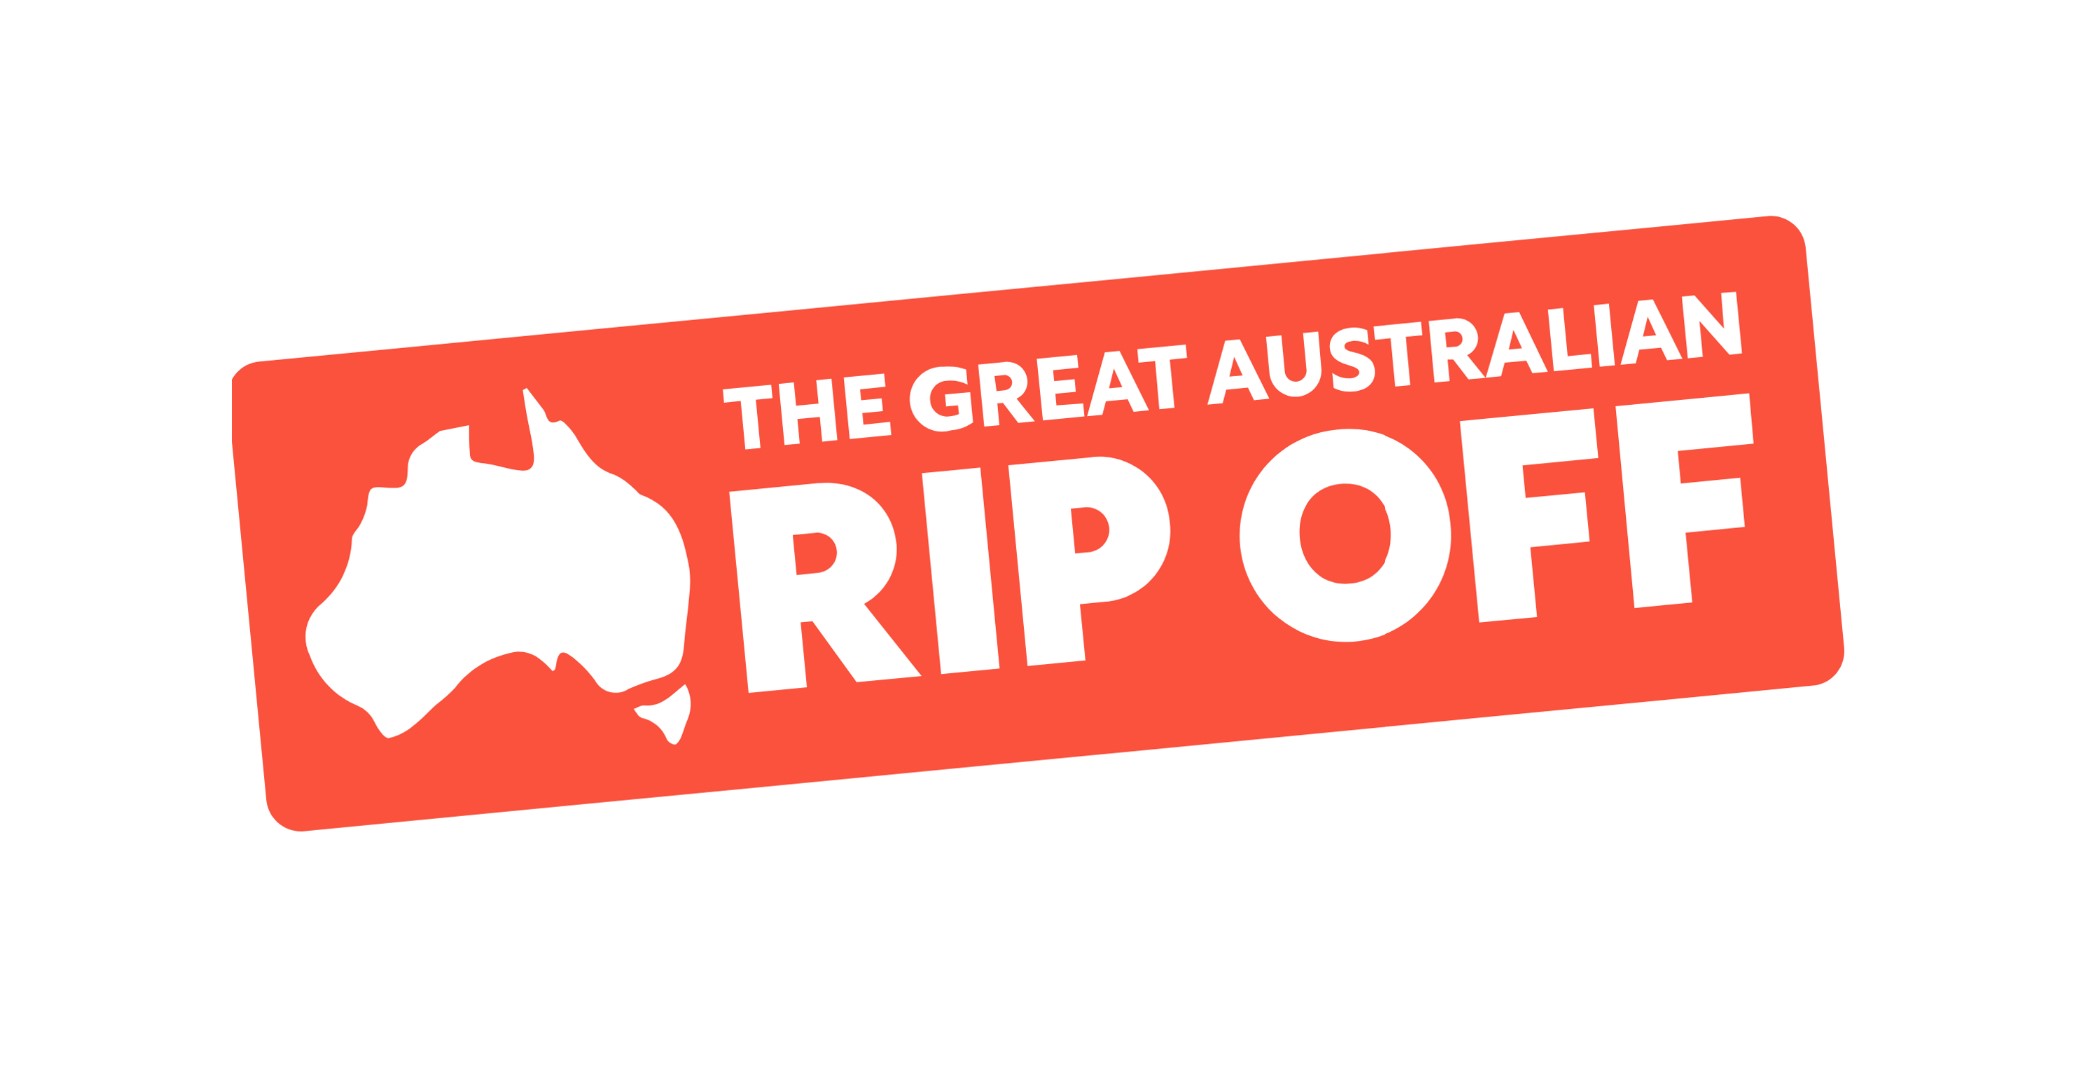 The Great Australian Rip off is just another rip off (warning)